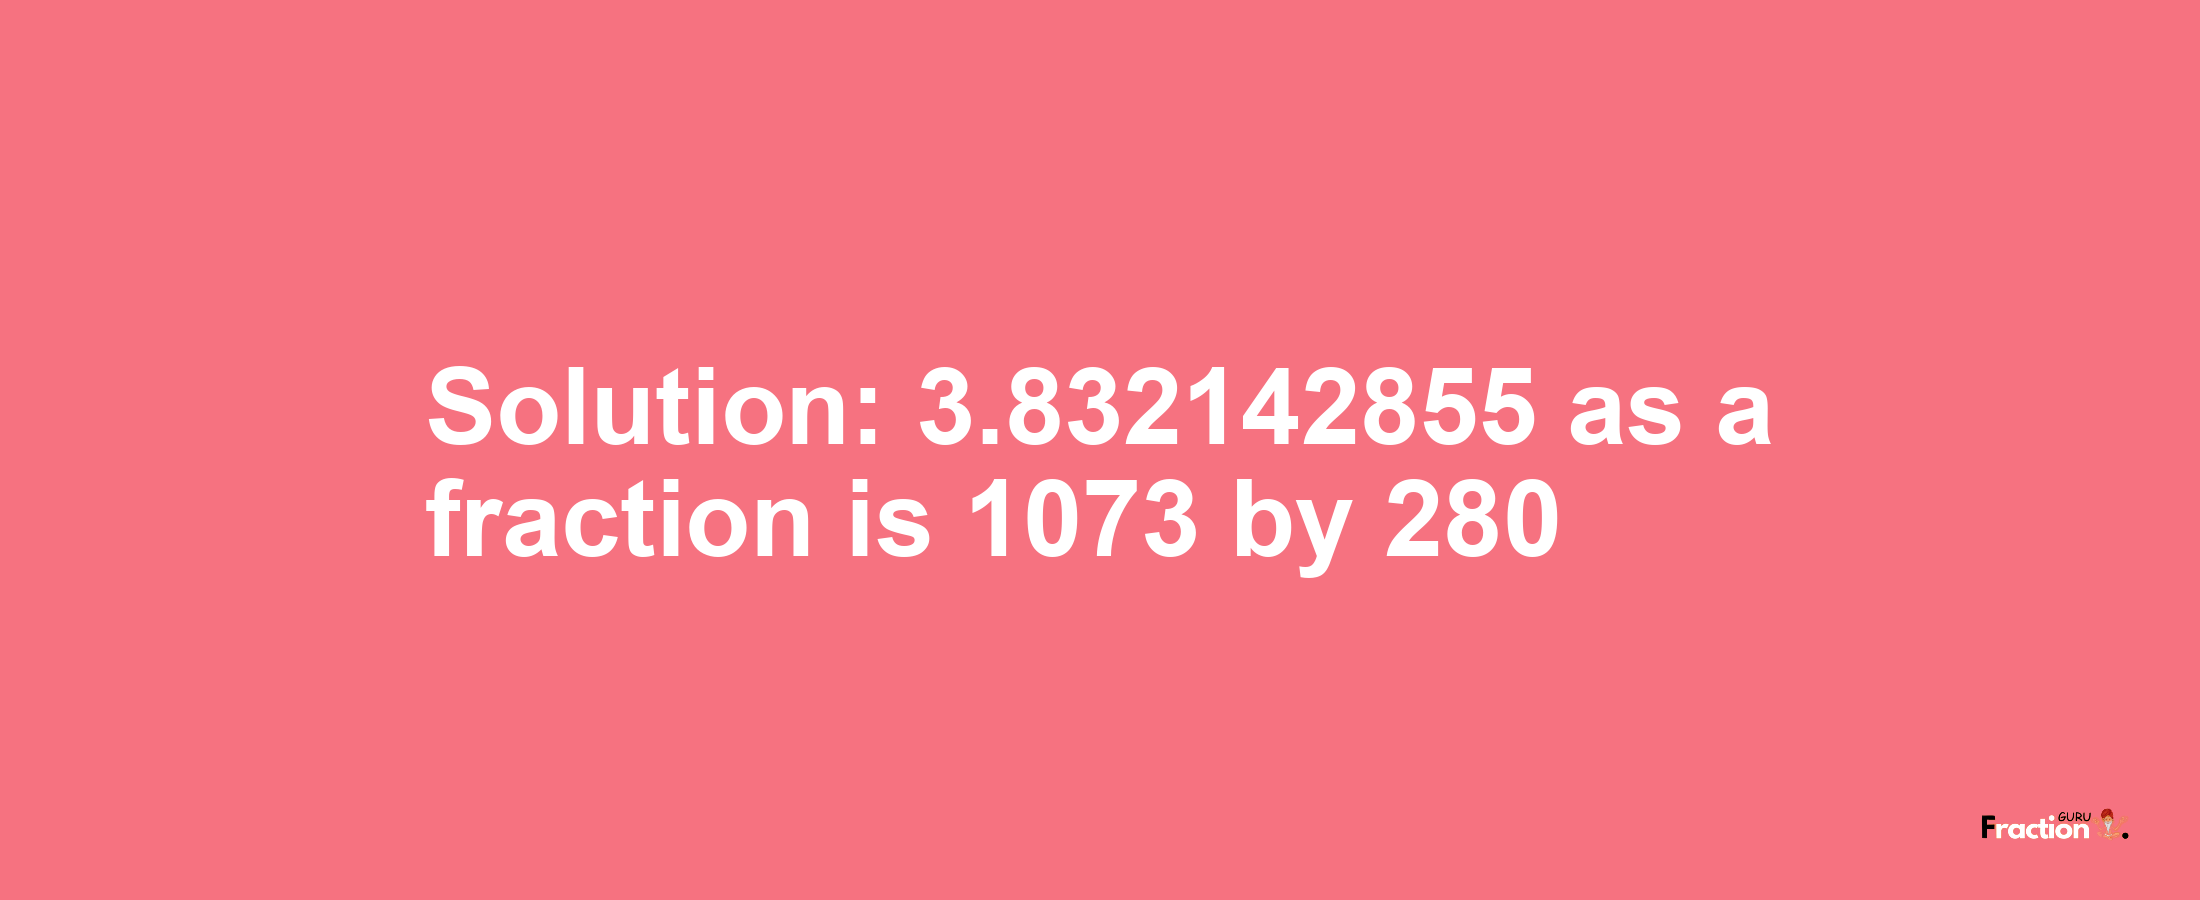 Solution:3.832142855 as a fraction is 1073/280